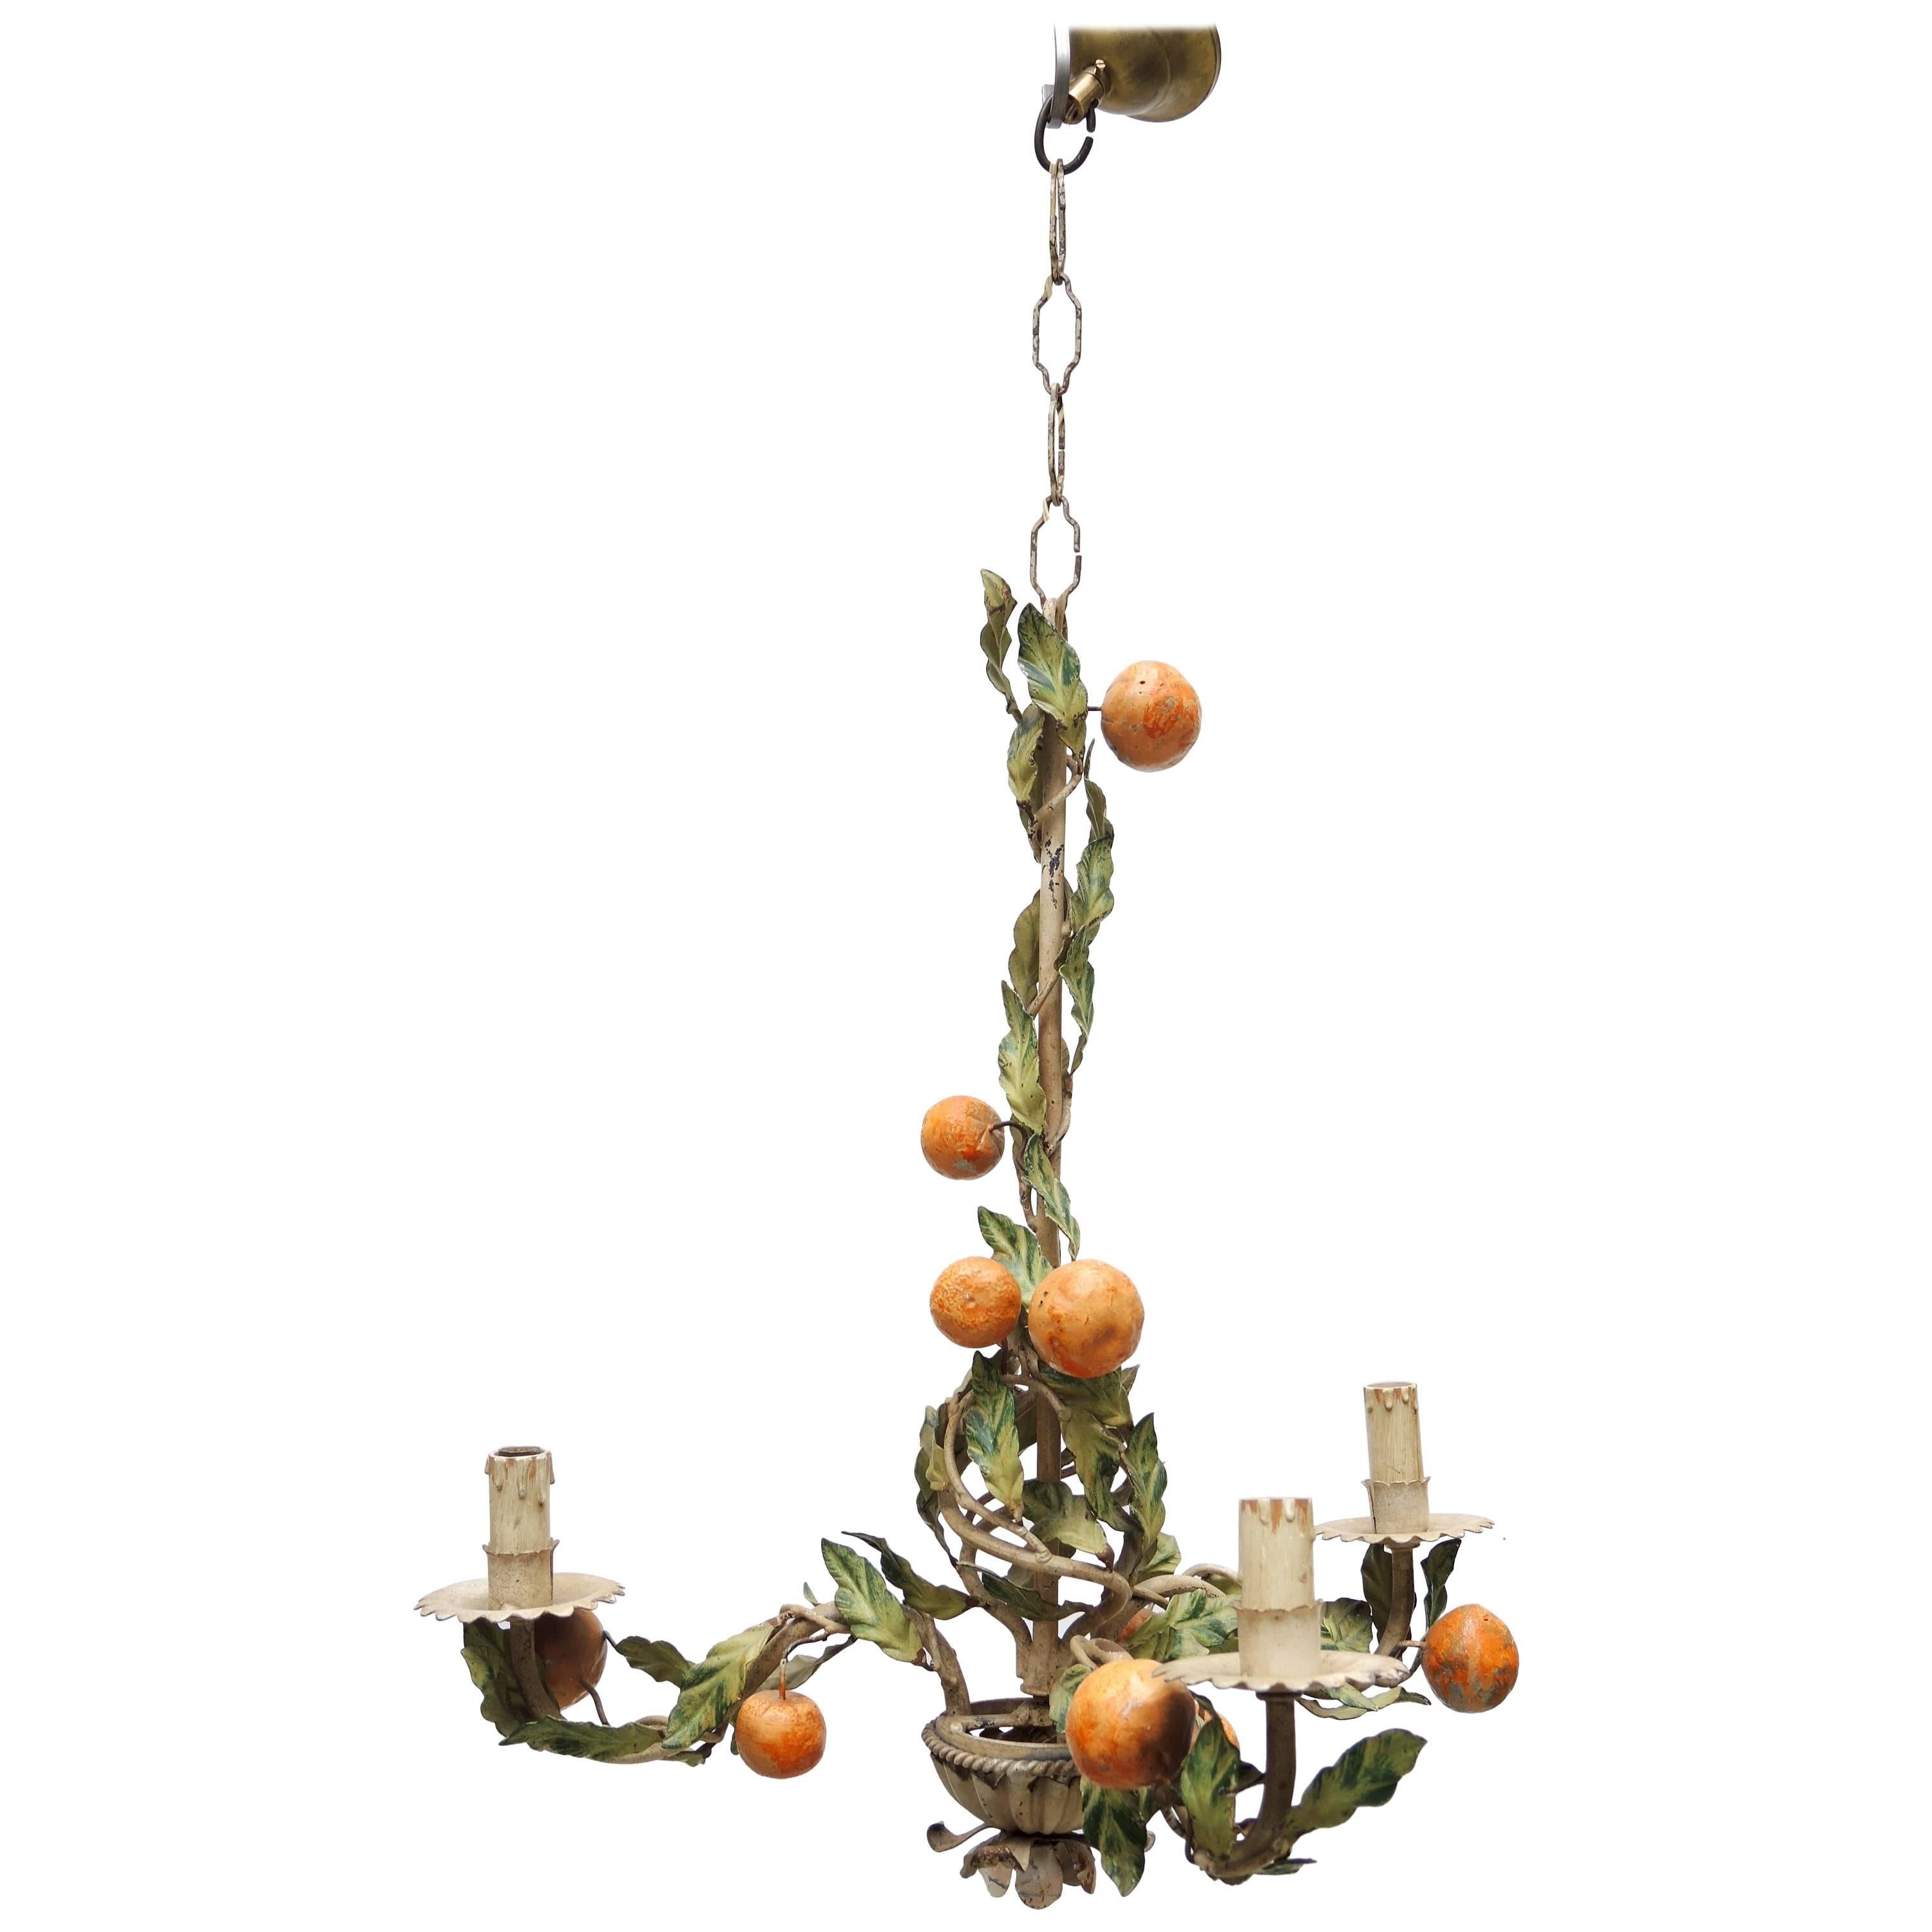 1940s Italian Tole and Iron Chandelier with Oranges and Leaves